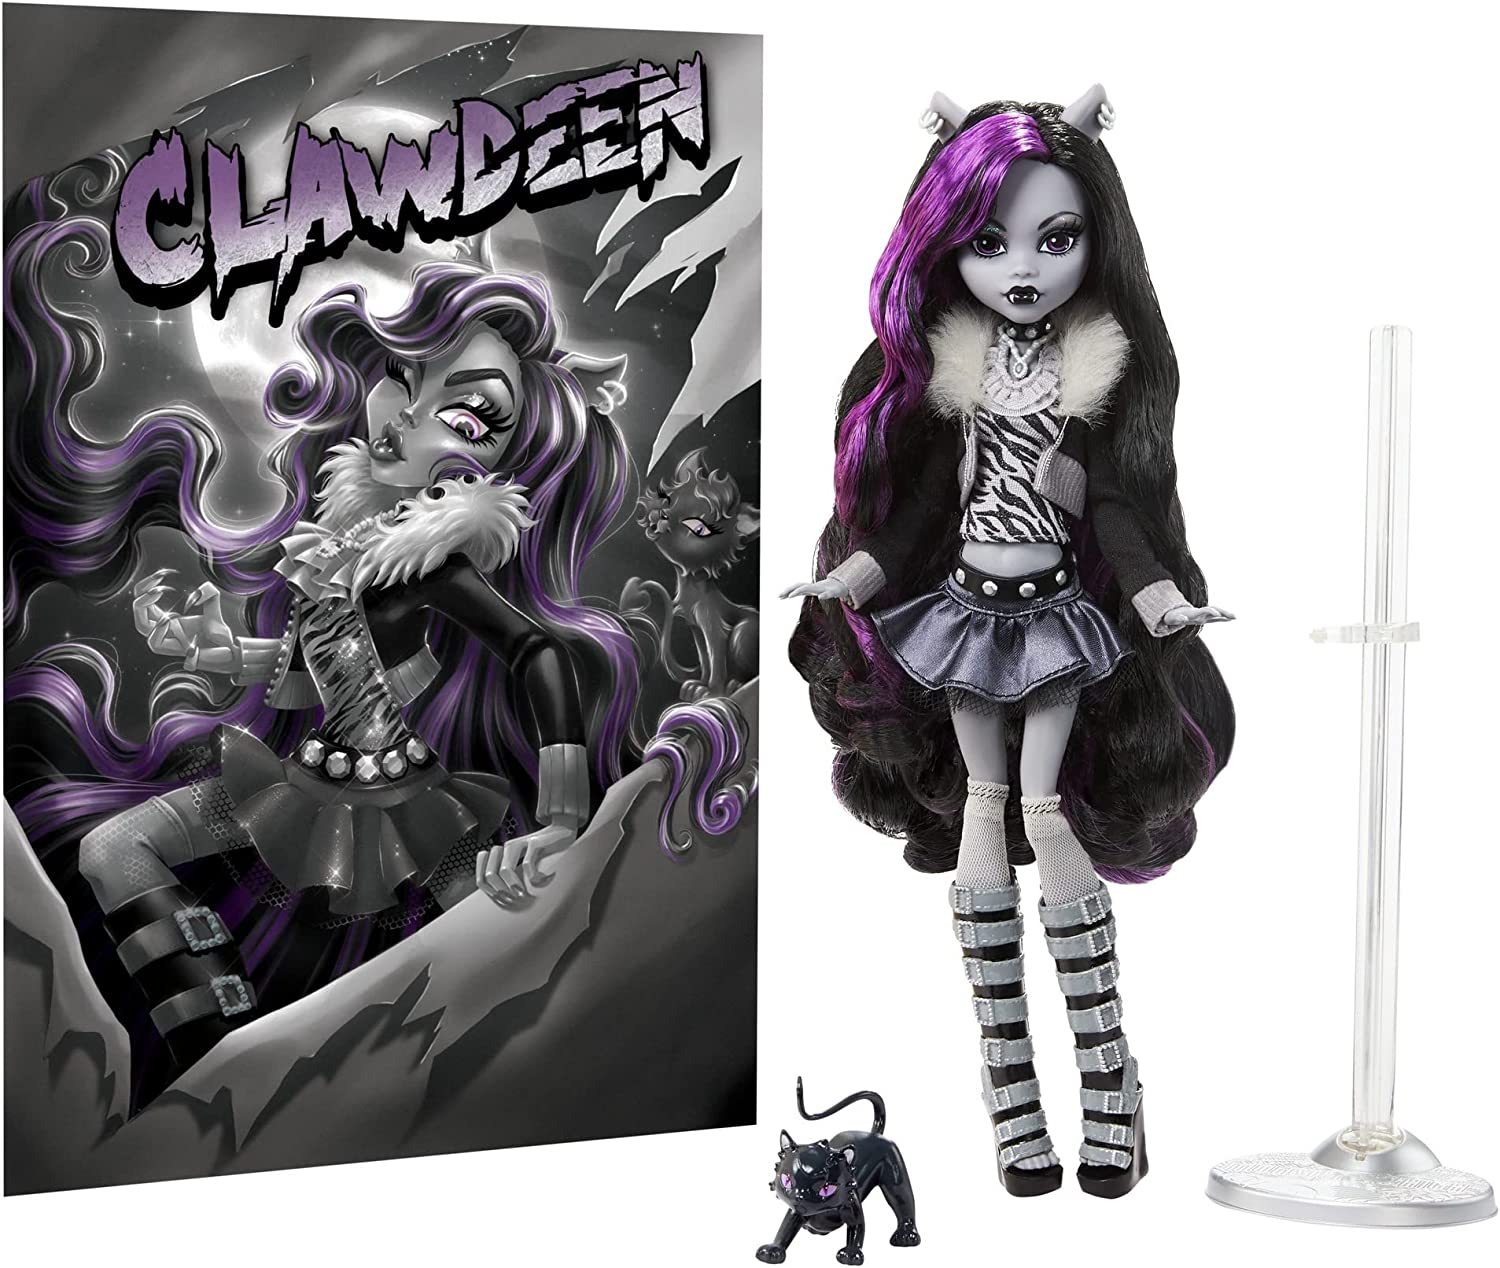 Monster High Reel Drama B&W doll images - General Discussion